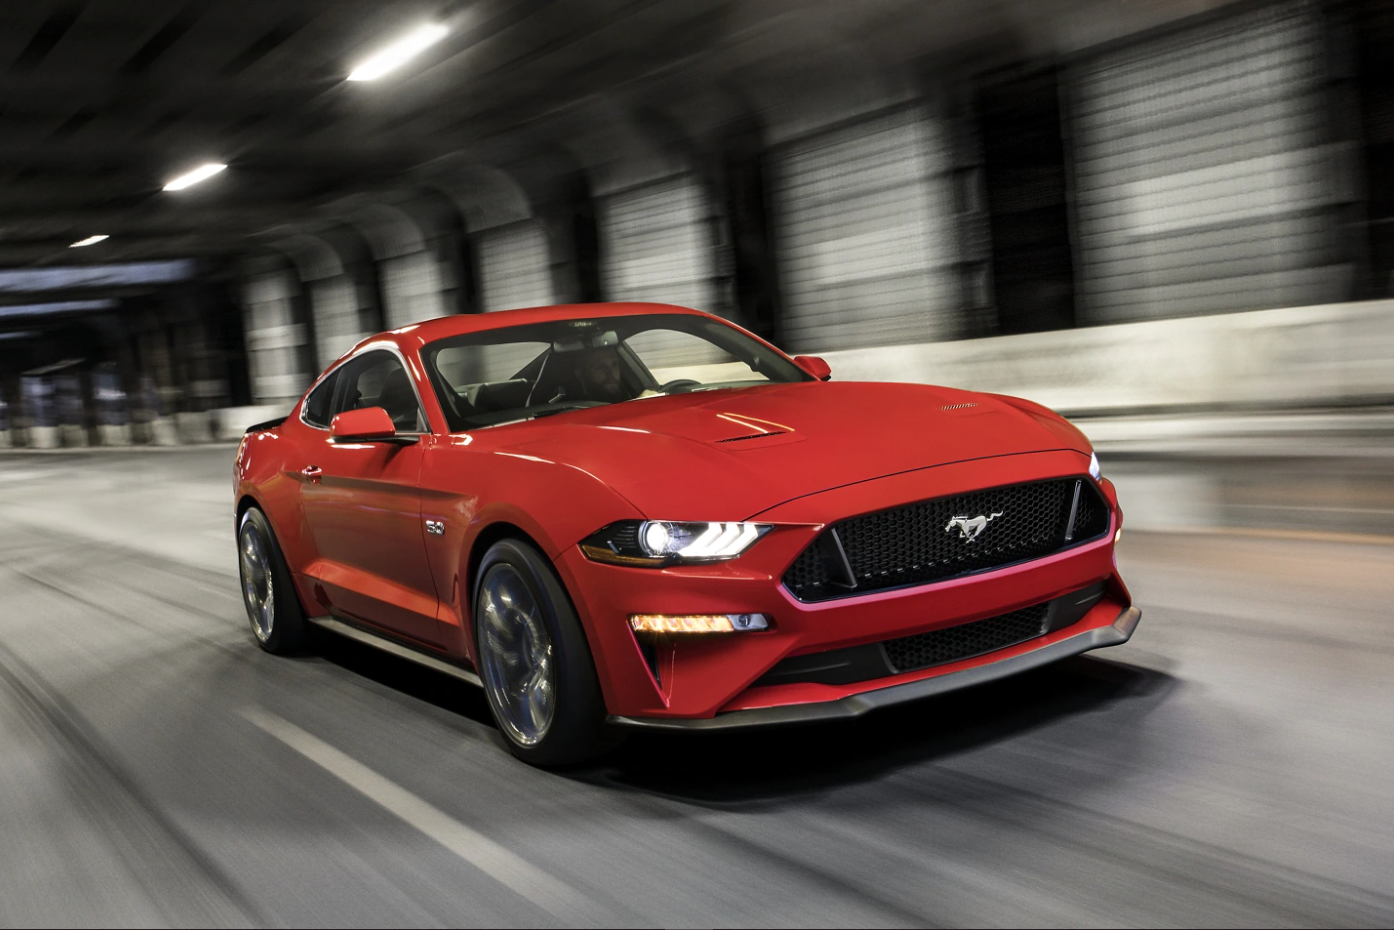 An angled view of a 2022 red Ford Mustang as it cruises down a covered city tunnel showing the grille and profile